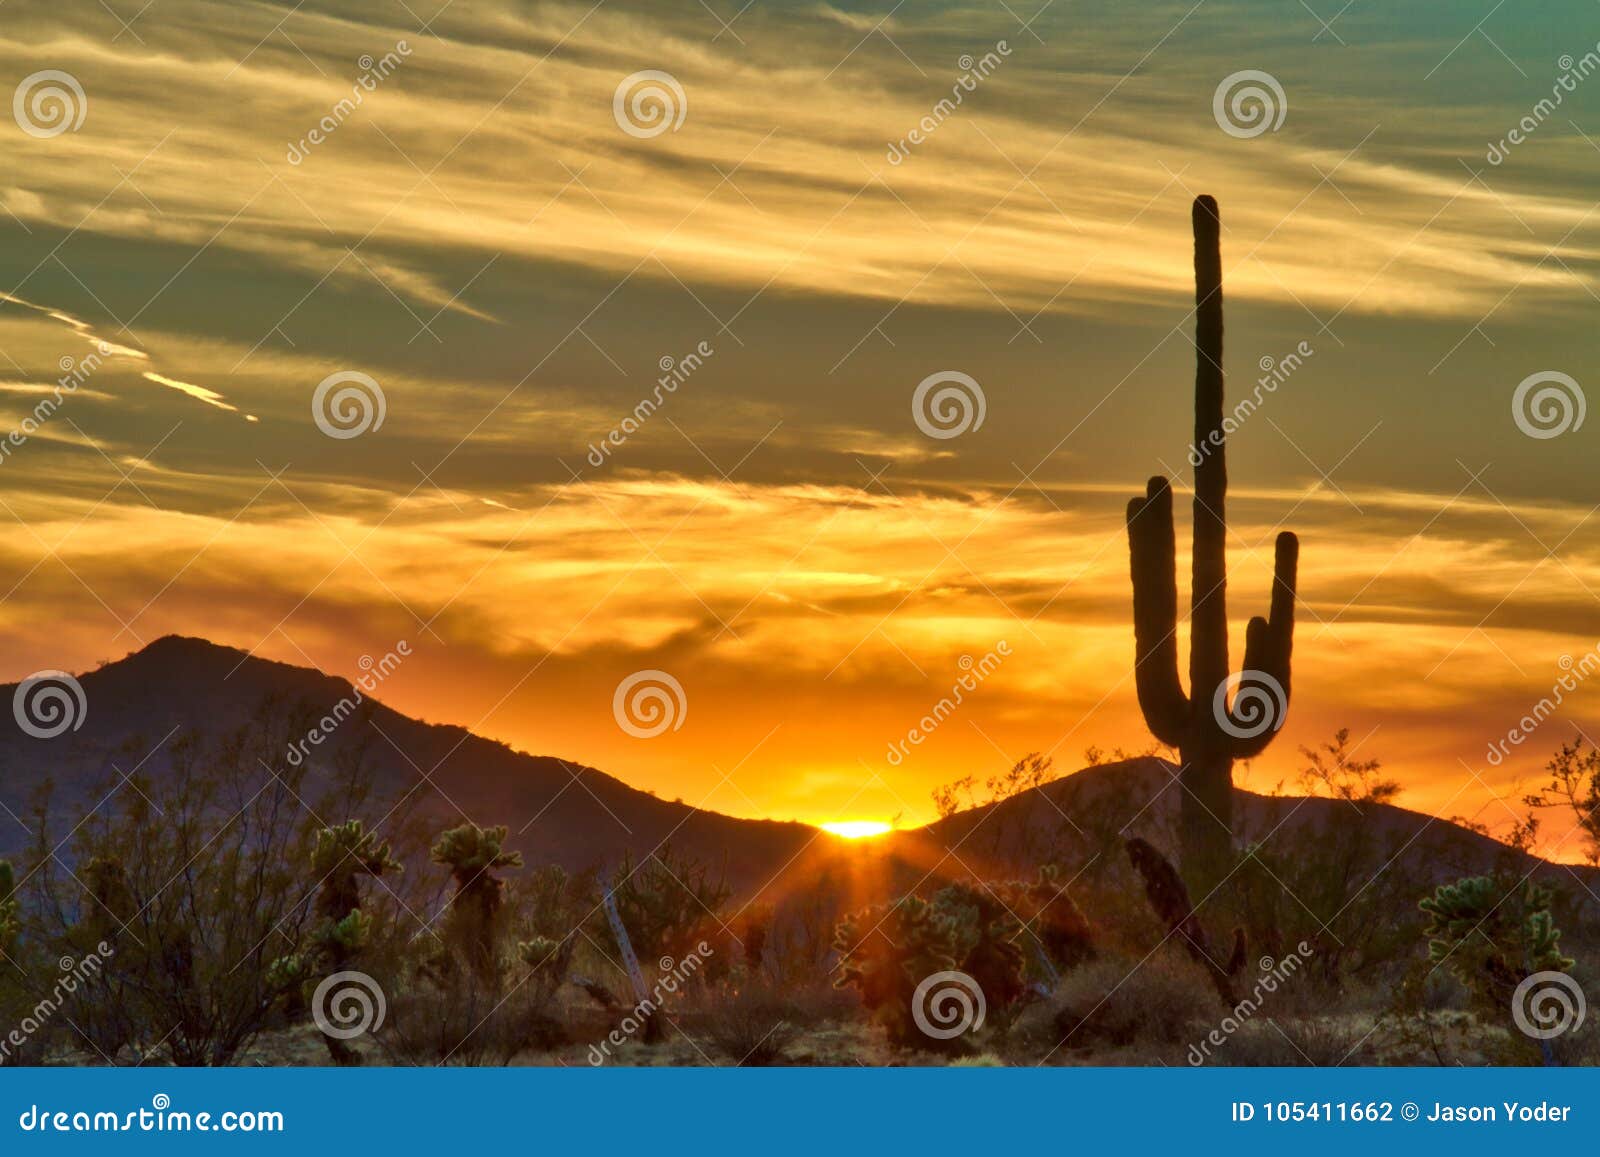 Cactus Against a Sunset Behind Mountains Stock Photo - Image of saguaro ...